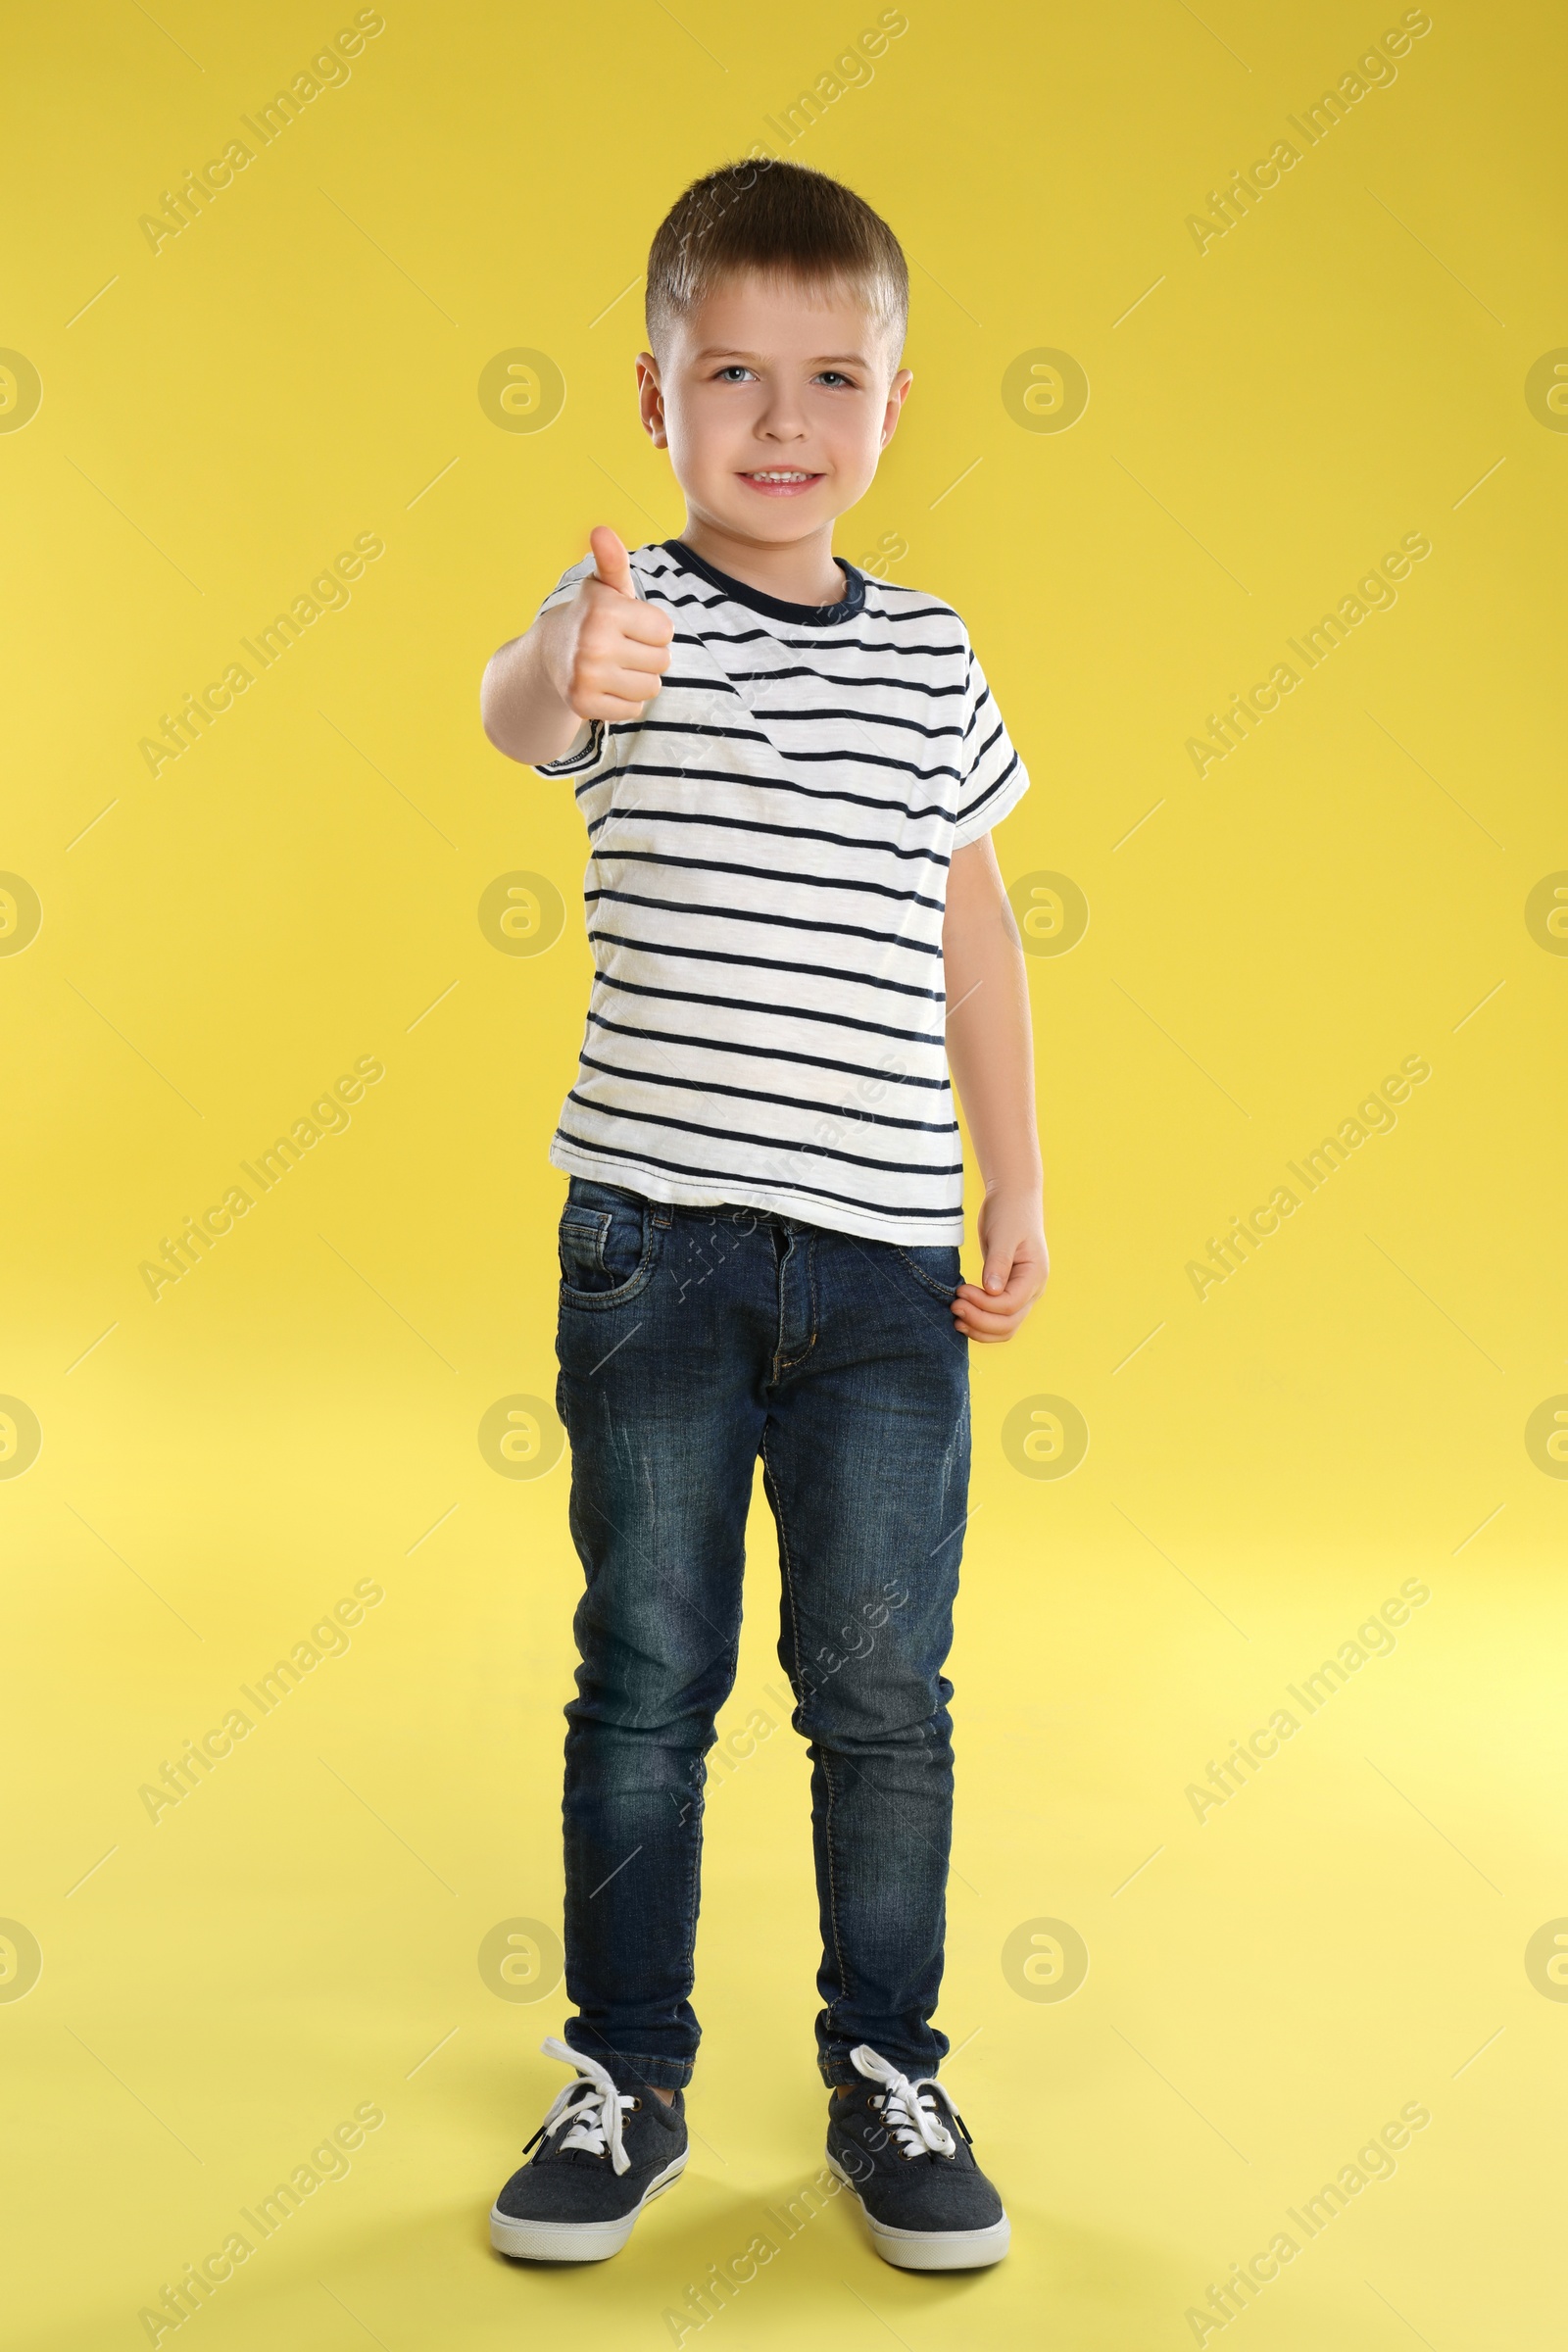 Photo of Little boy showing thumb up on yellow background